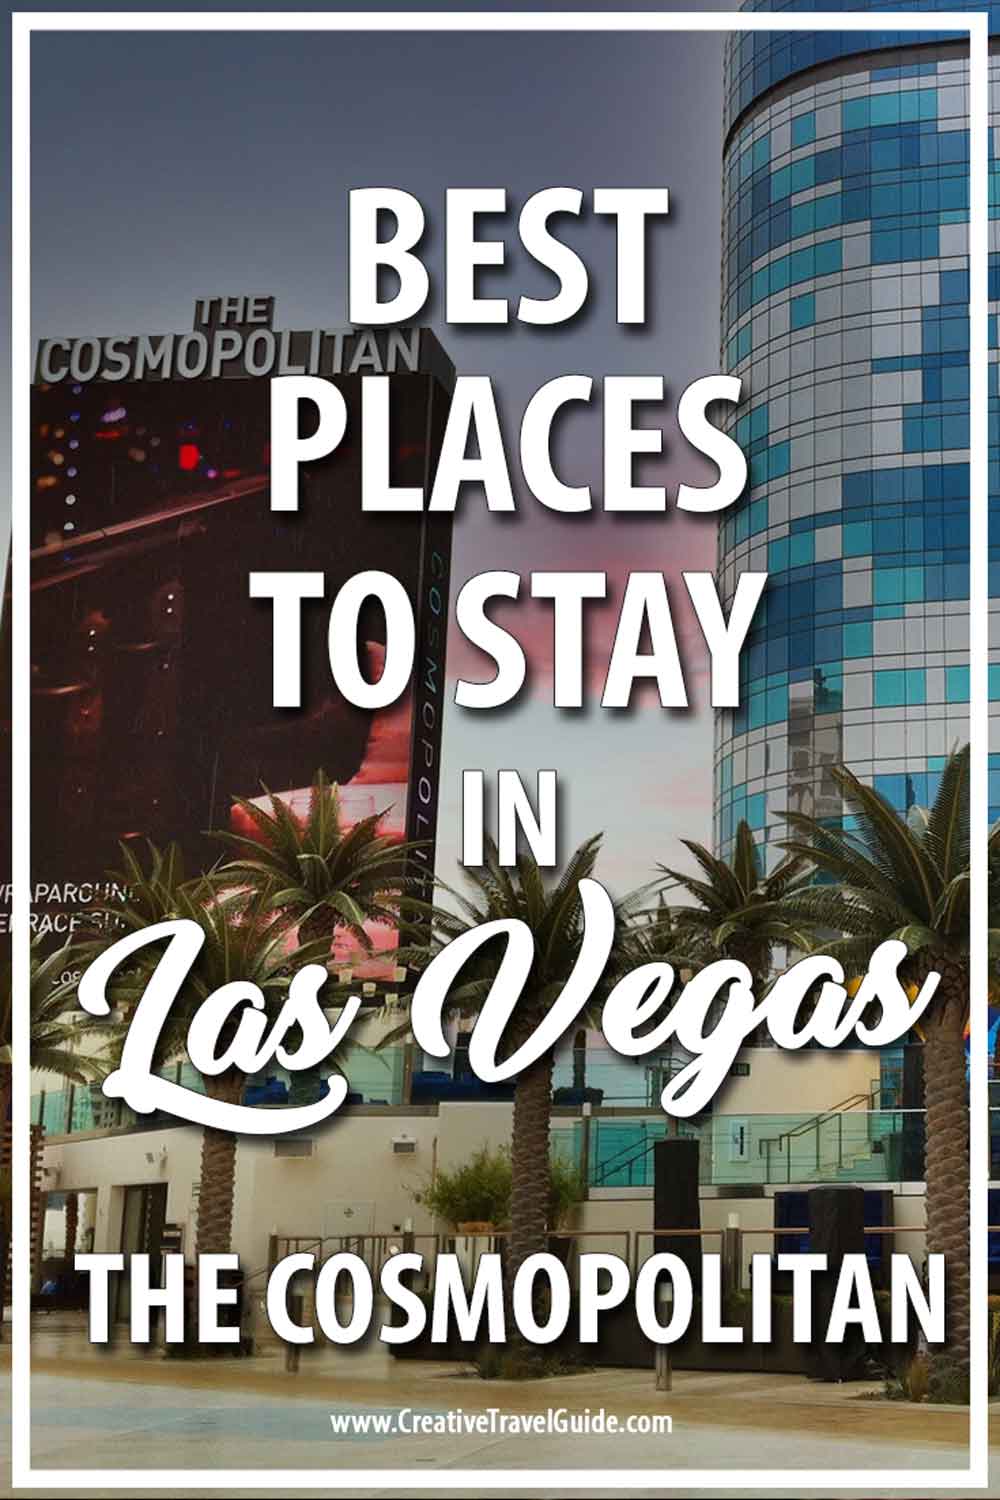 Best place to stay in vegas